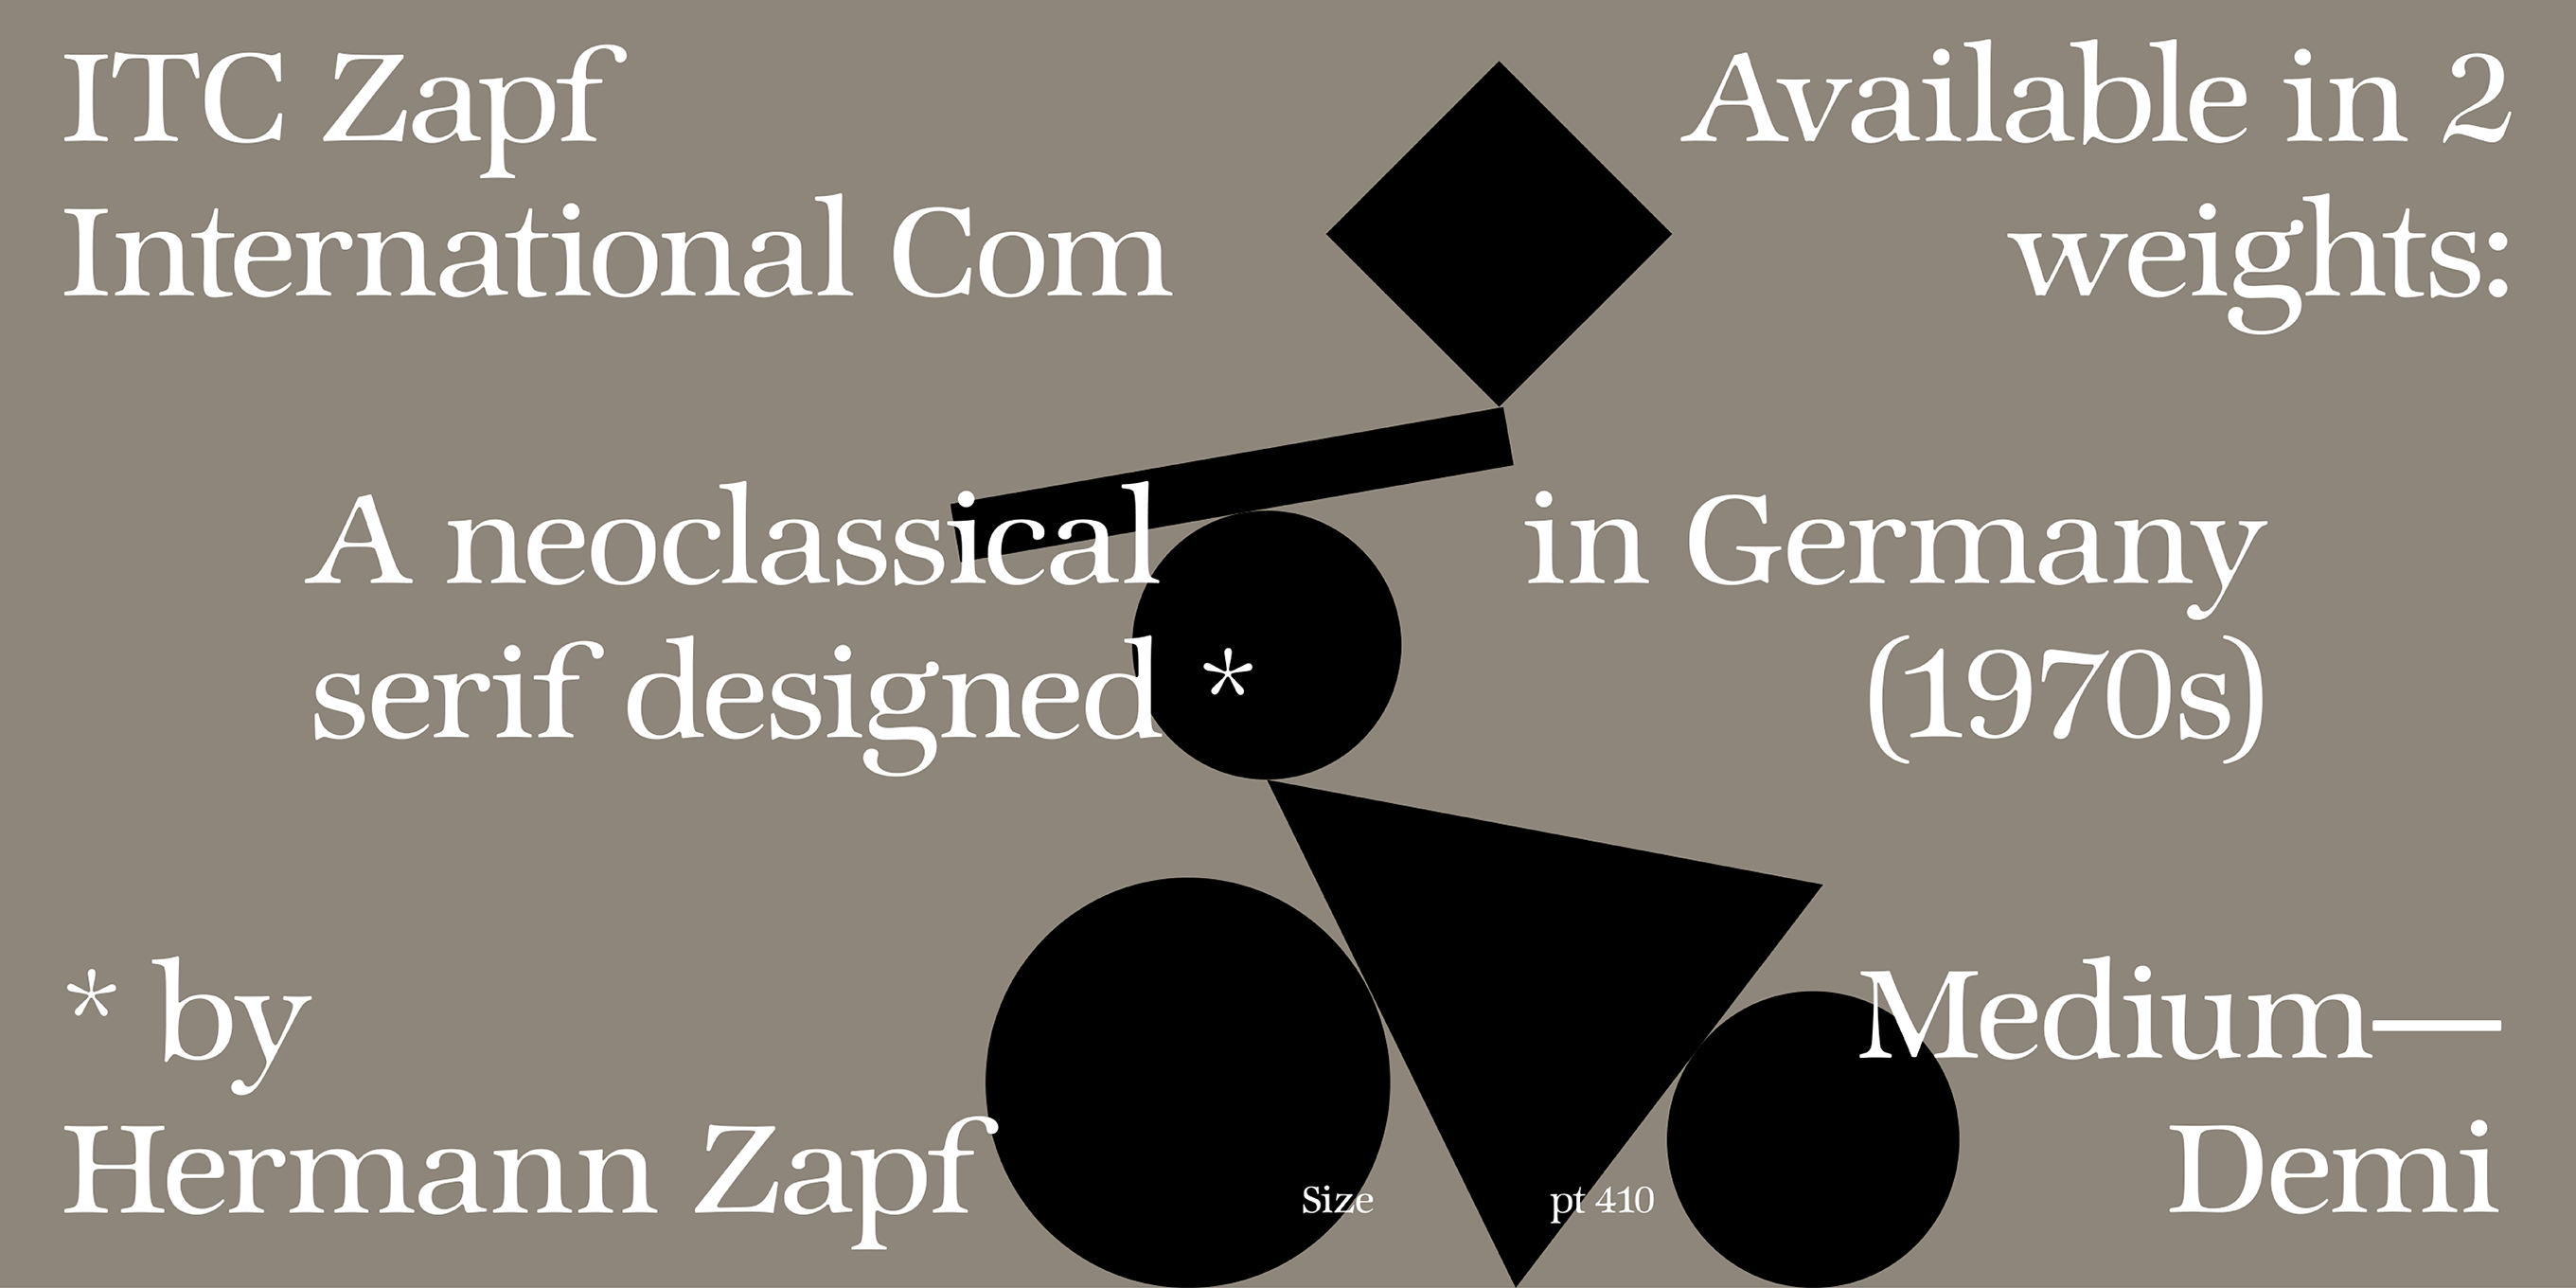 Card displaying ITC Zapf International typeface in various styles